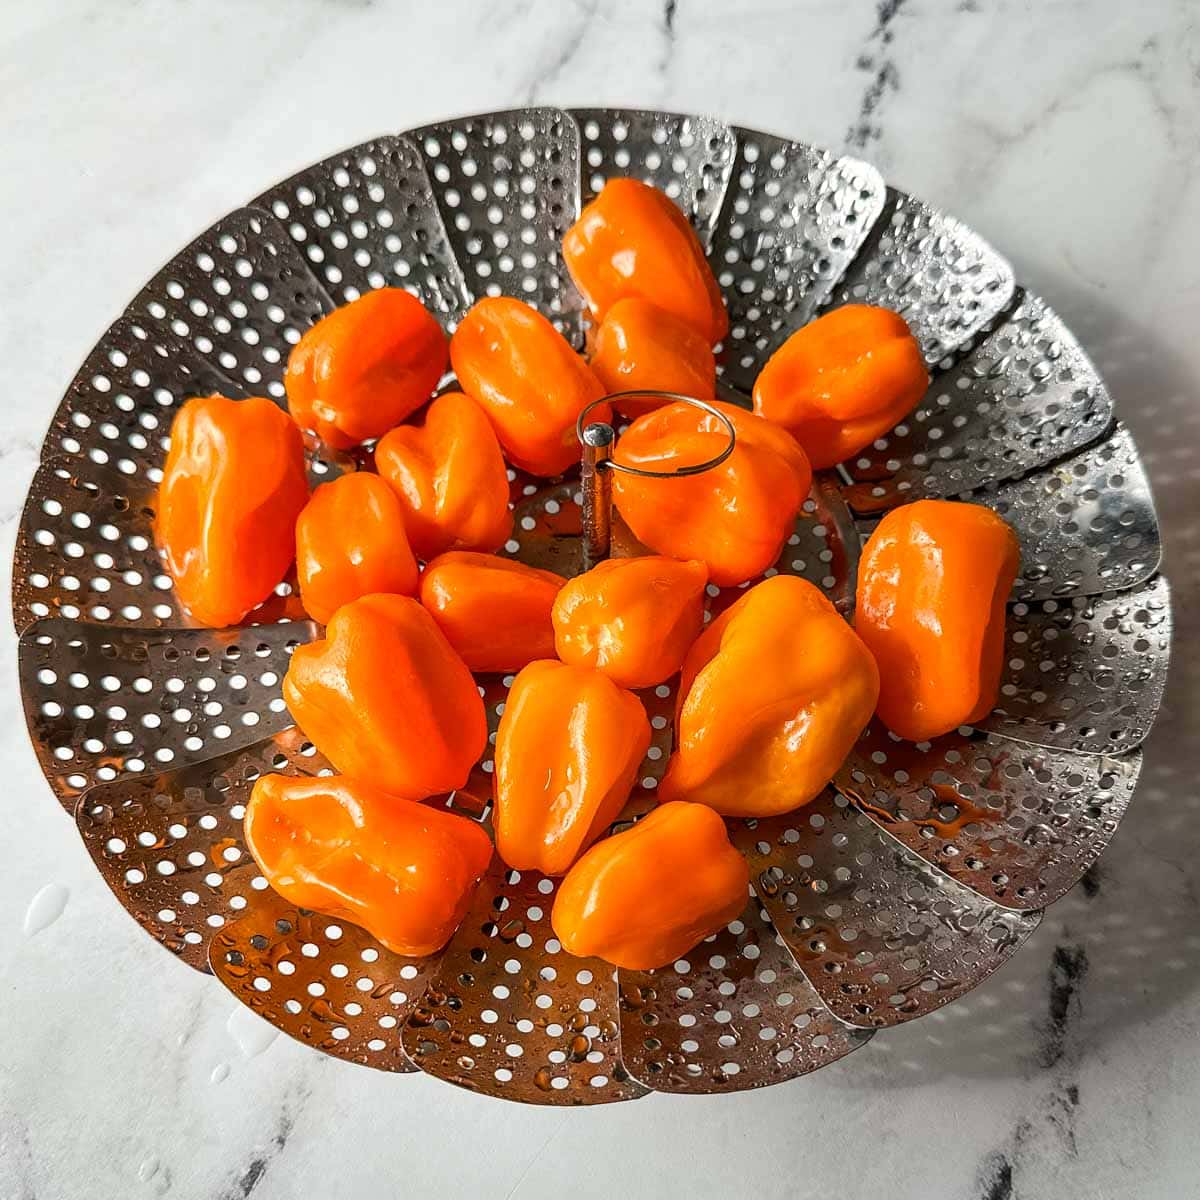 Washed habanero peppers sit in a silver strainer on a white marble counter.